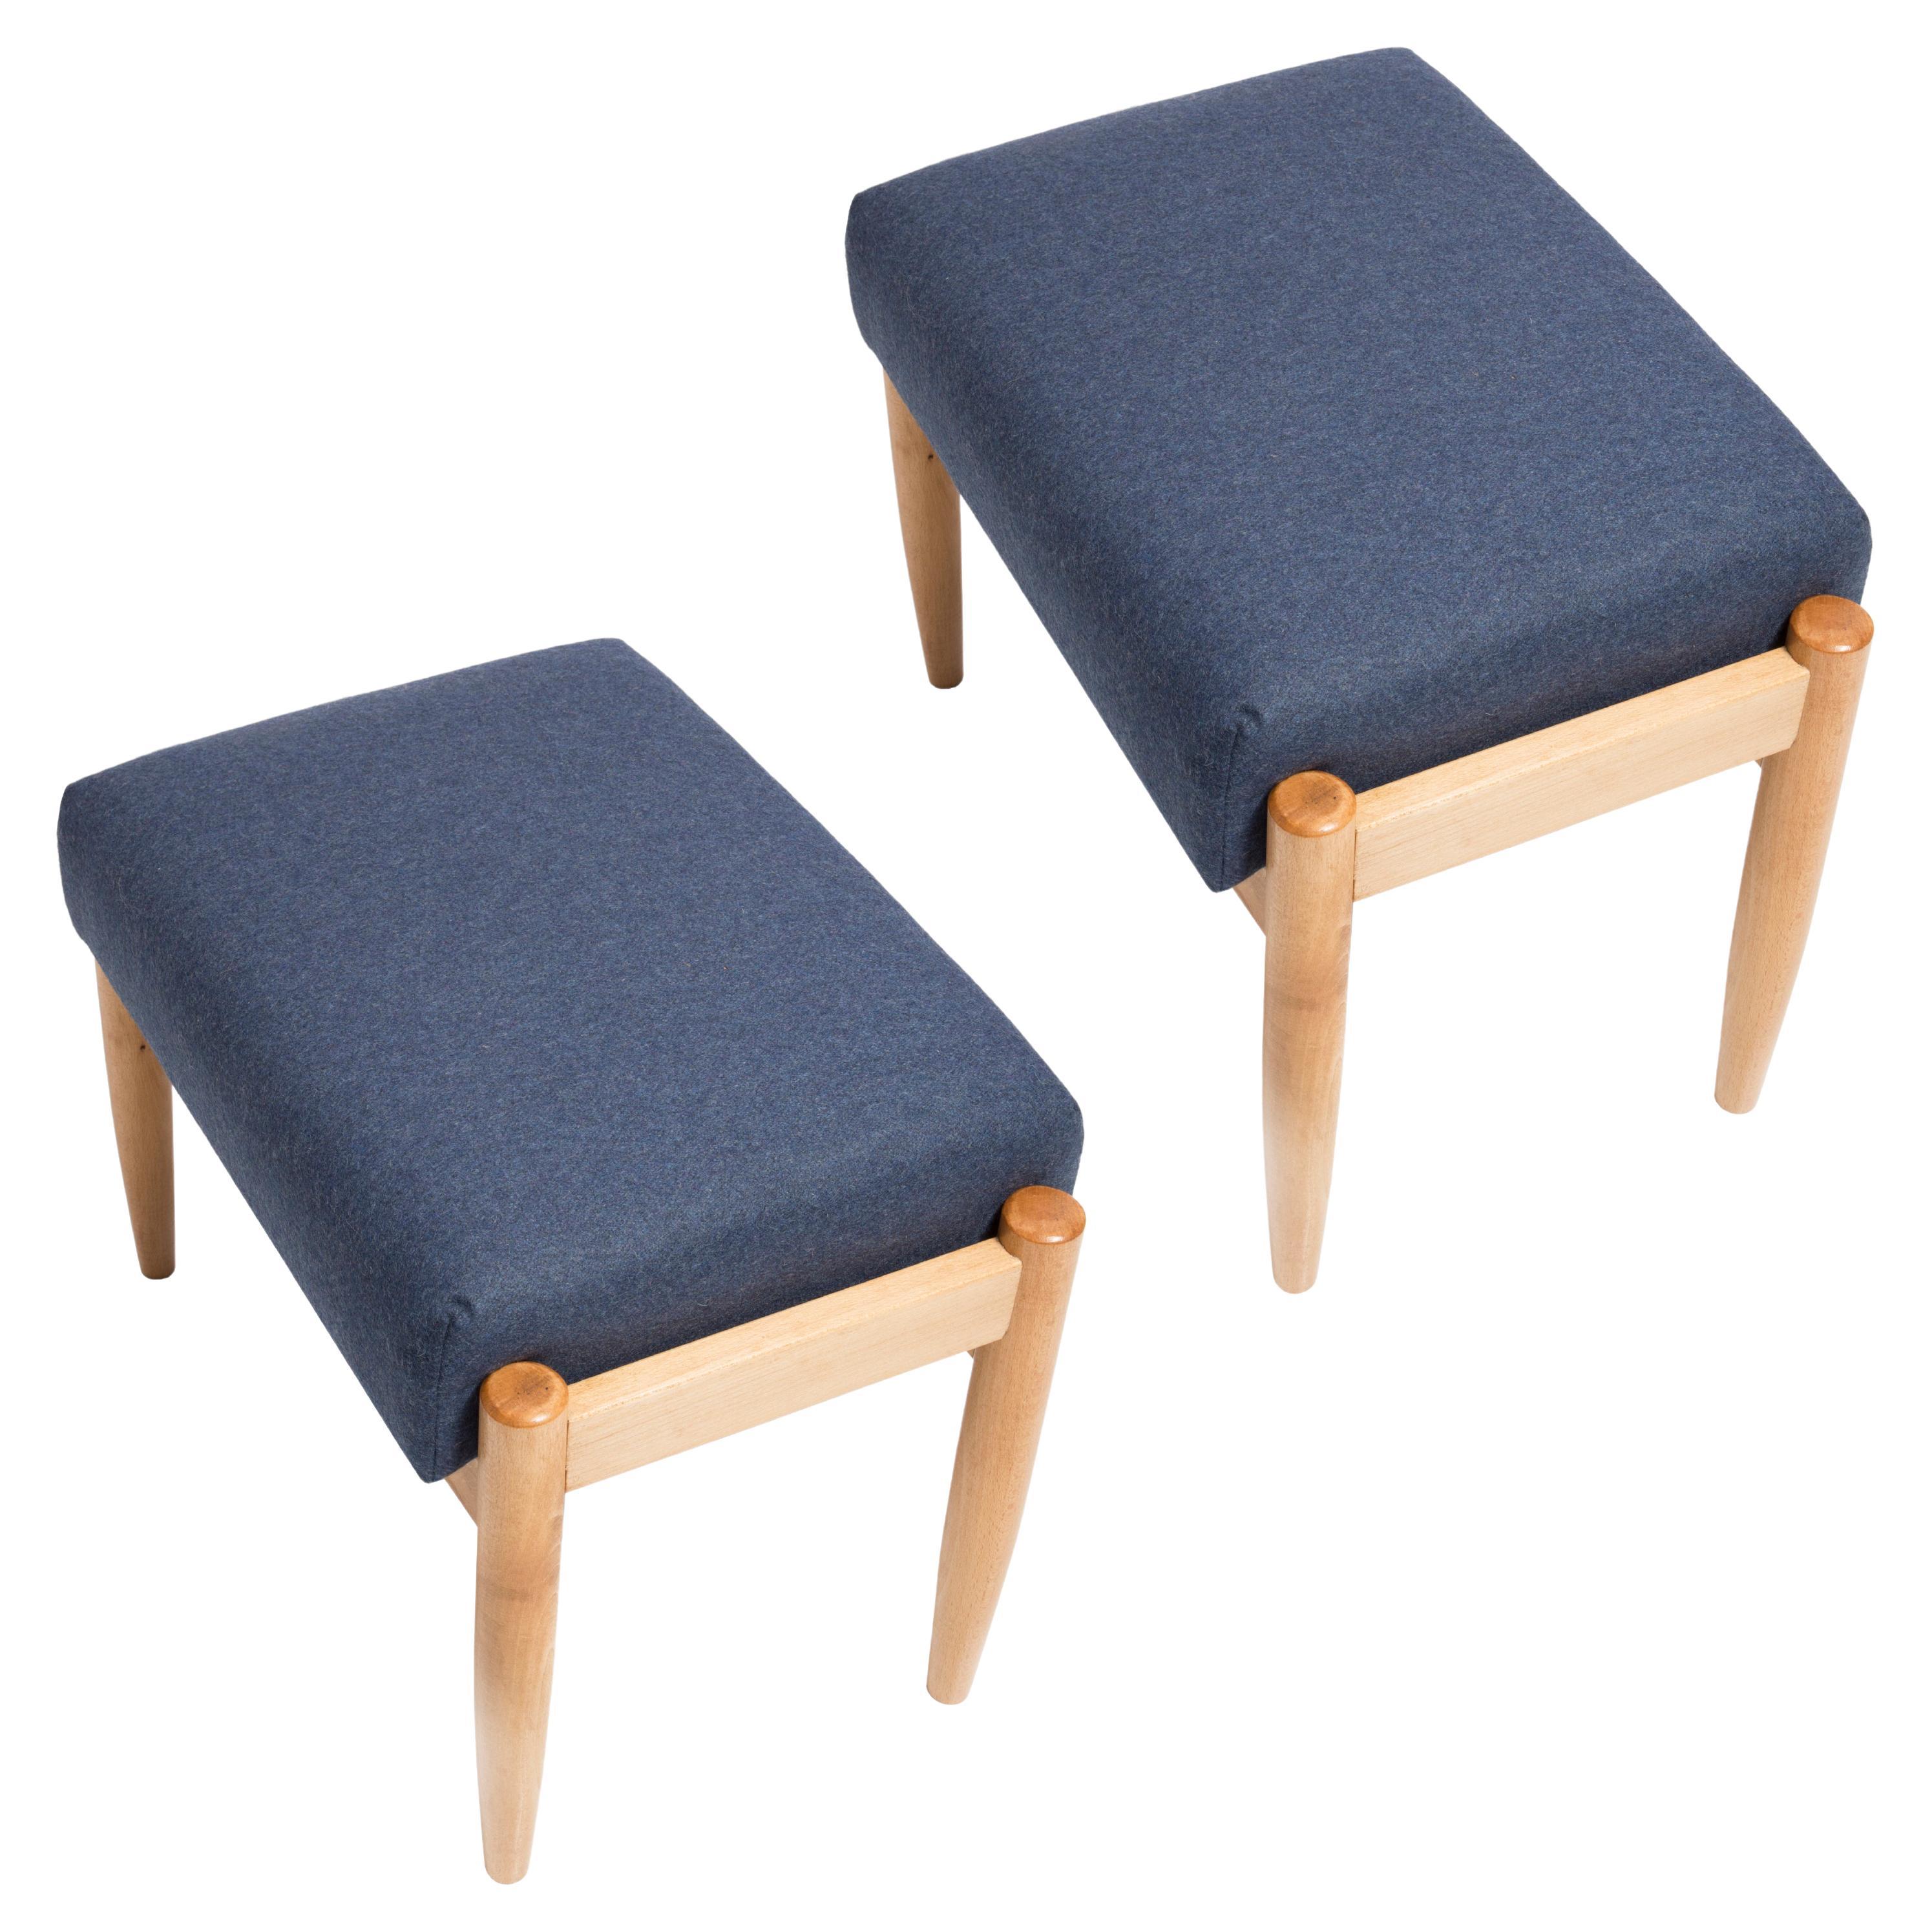 Pair of 20th Century Navy Blue Wool Vintage Stools, Edmund Homa, 1960s For Sale